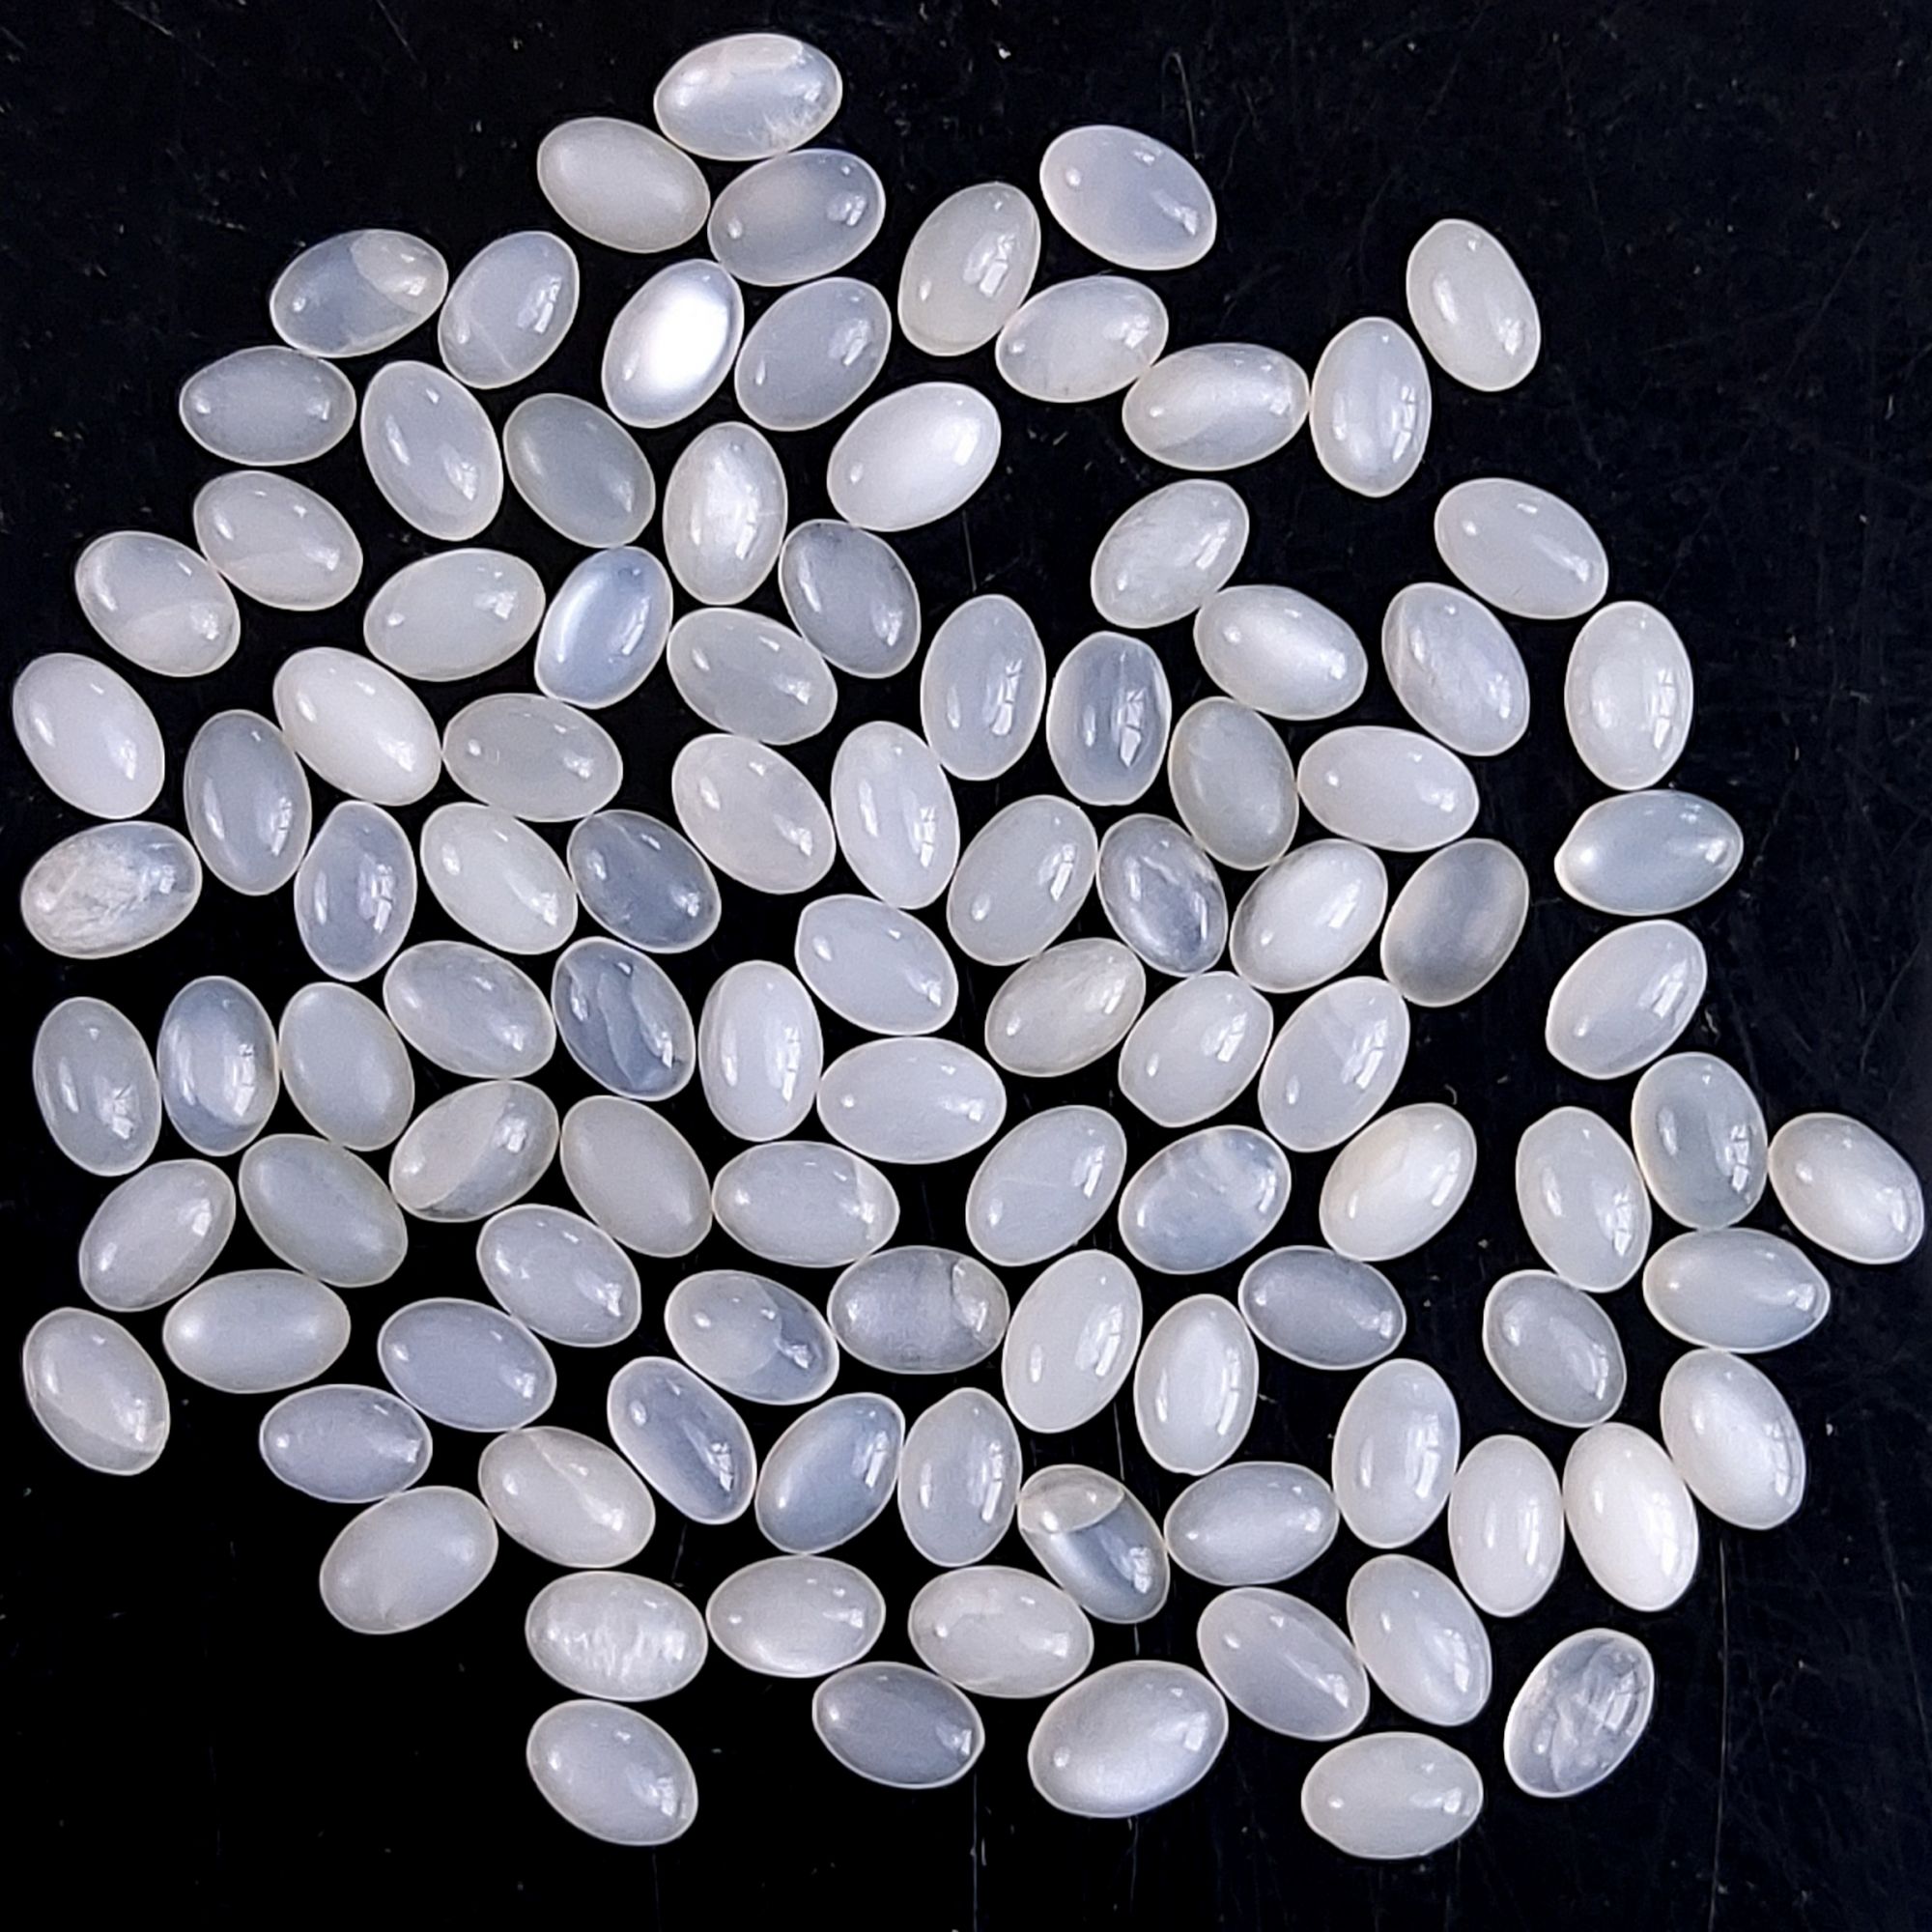 104Pcs 49Cts Natural White Moonstone Loose Cabochon Oval Shape Gemstone For Jewelry Making Lot 4x4mm#648